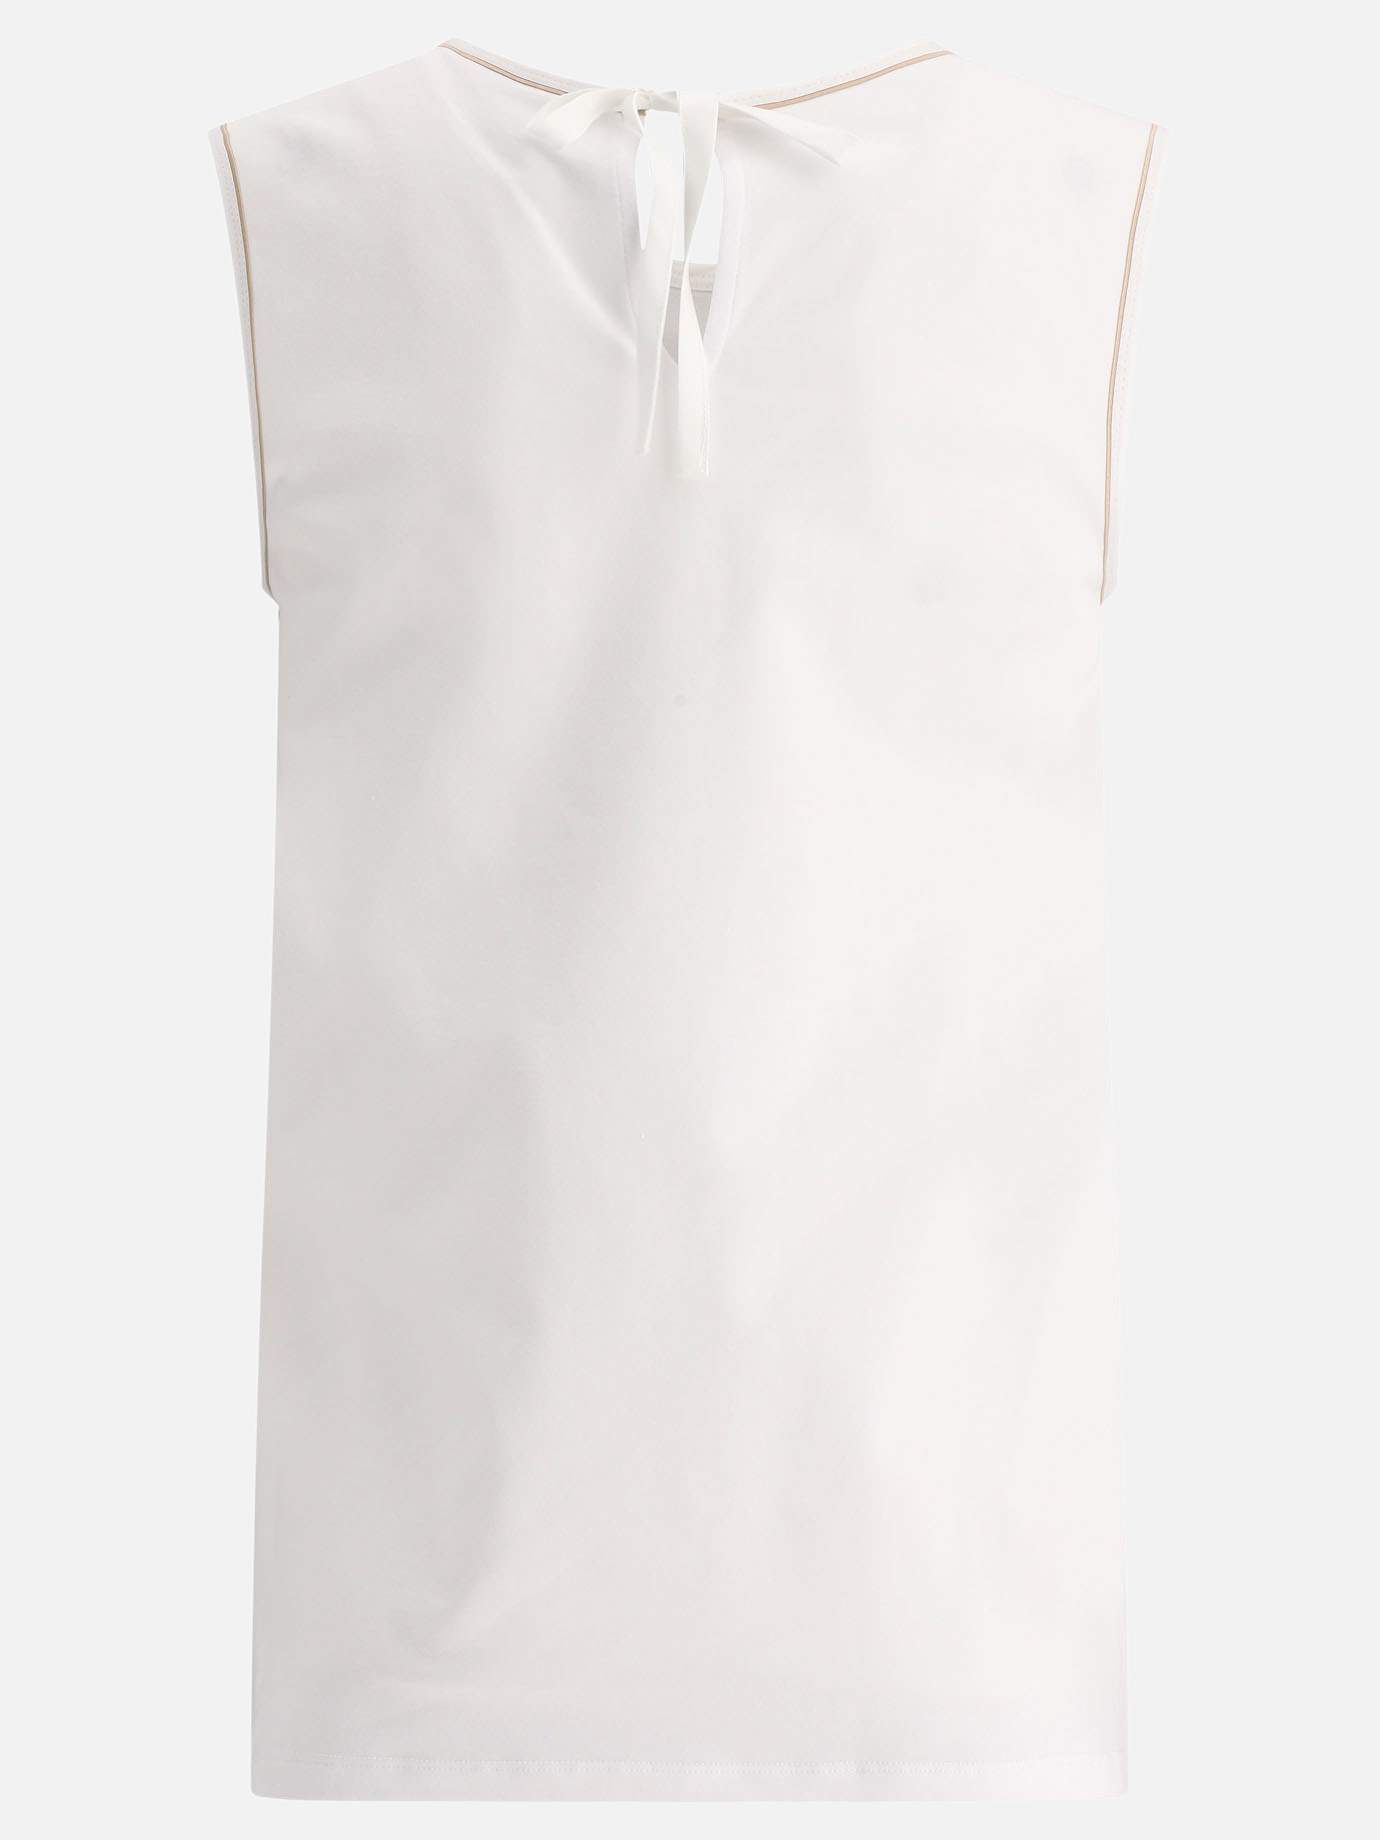 Sleeveless top with cut-out by Peserico